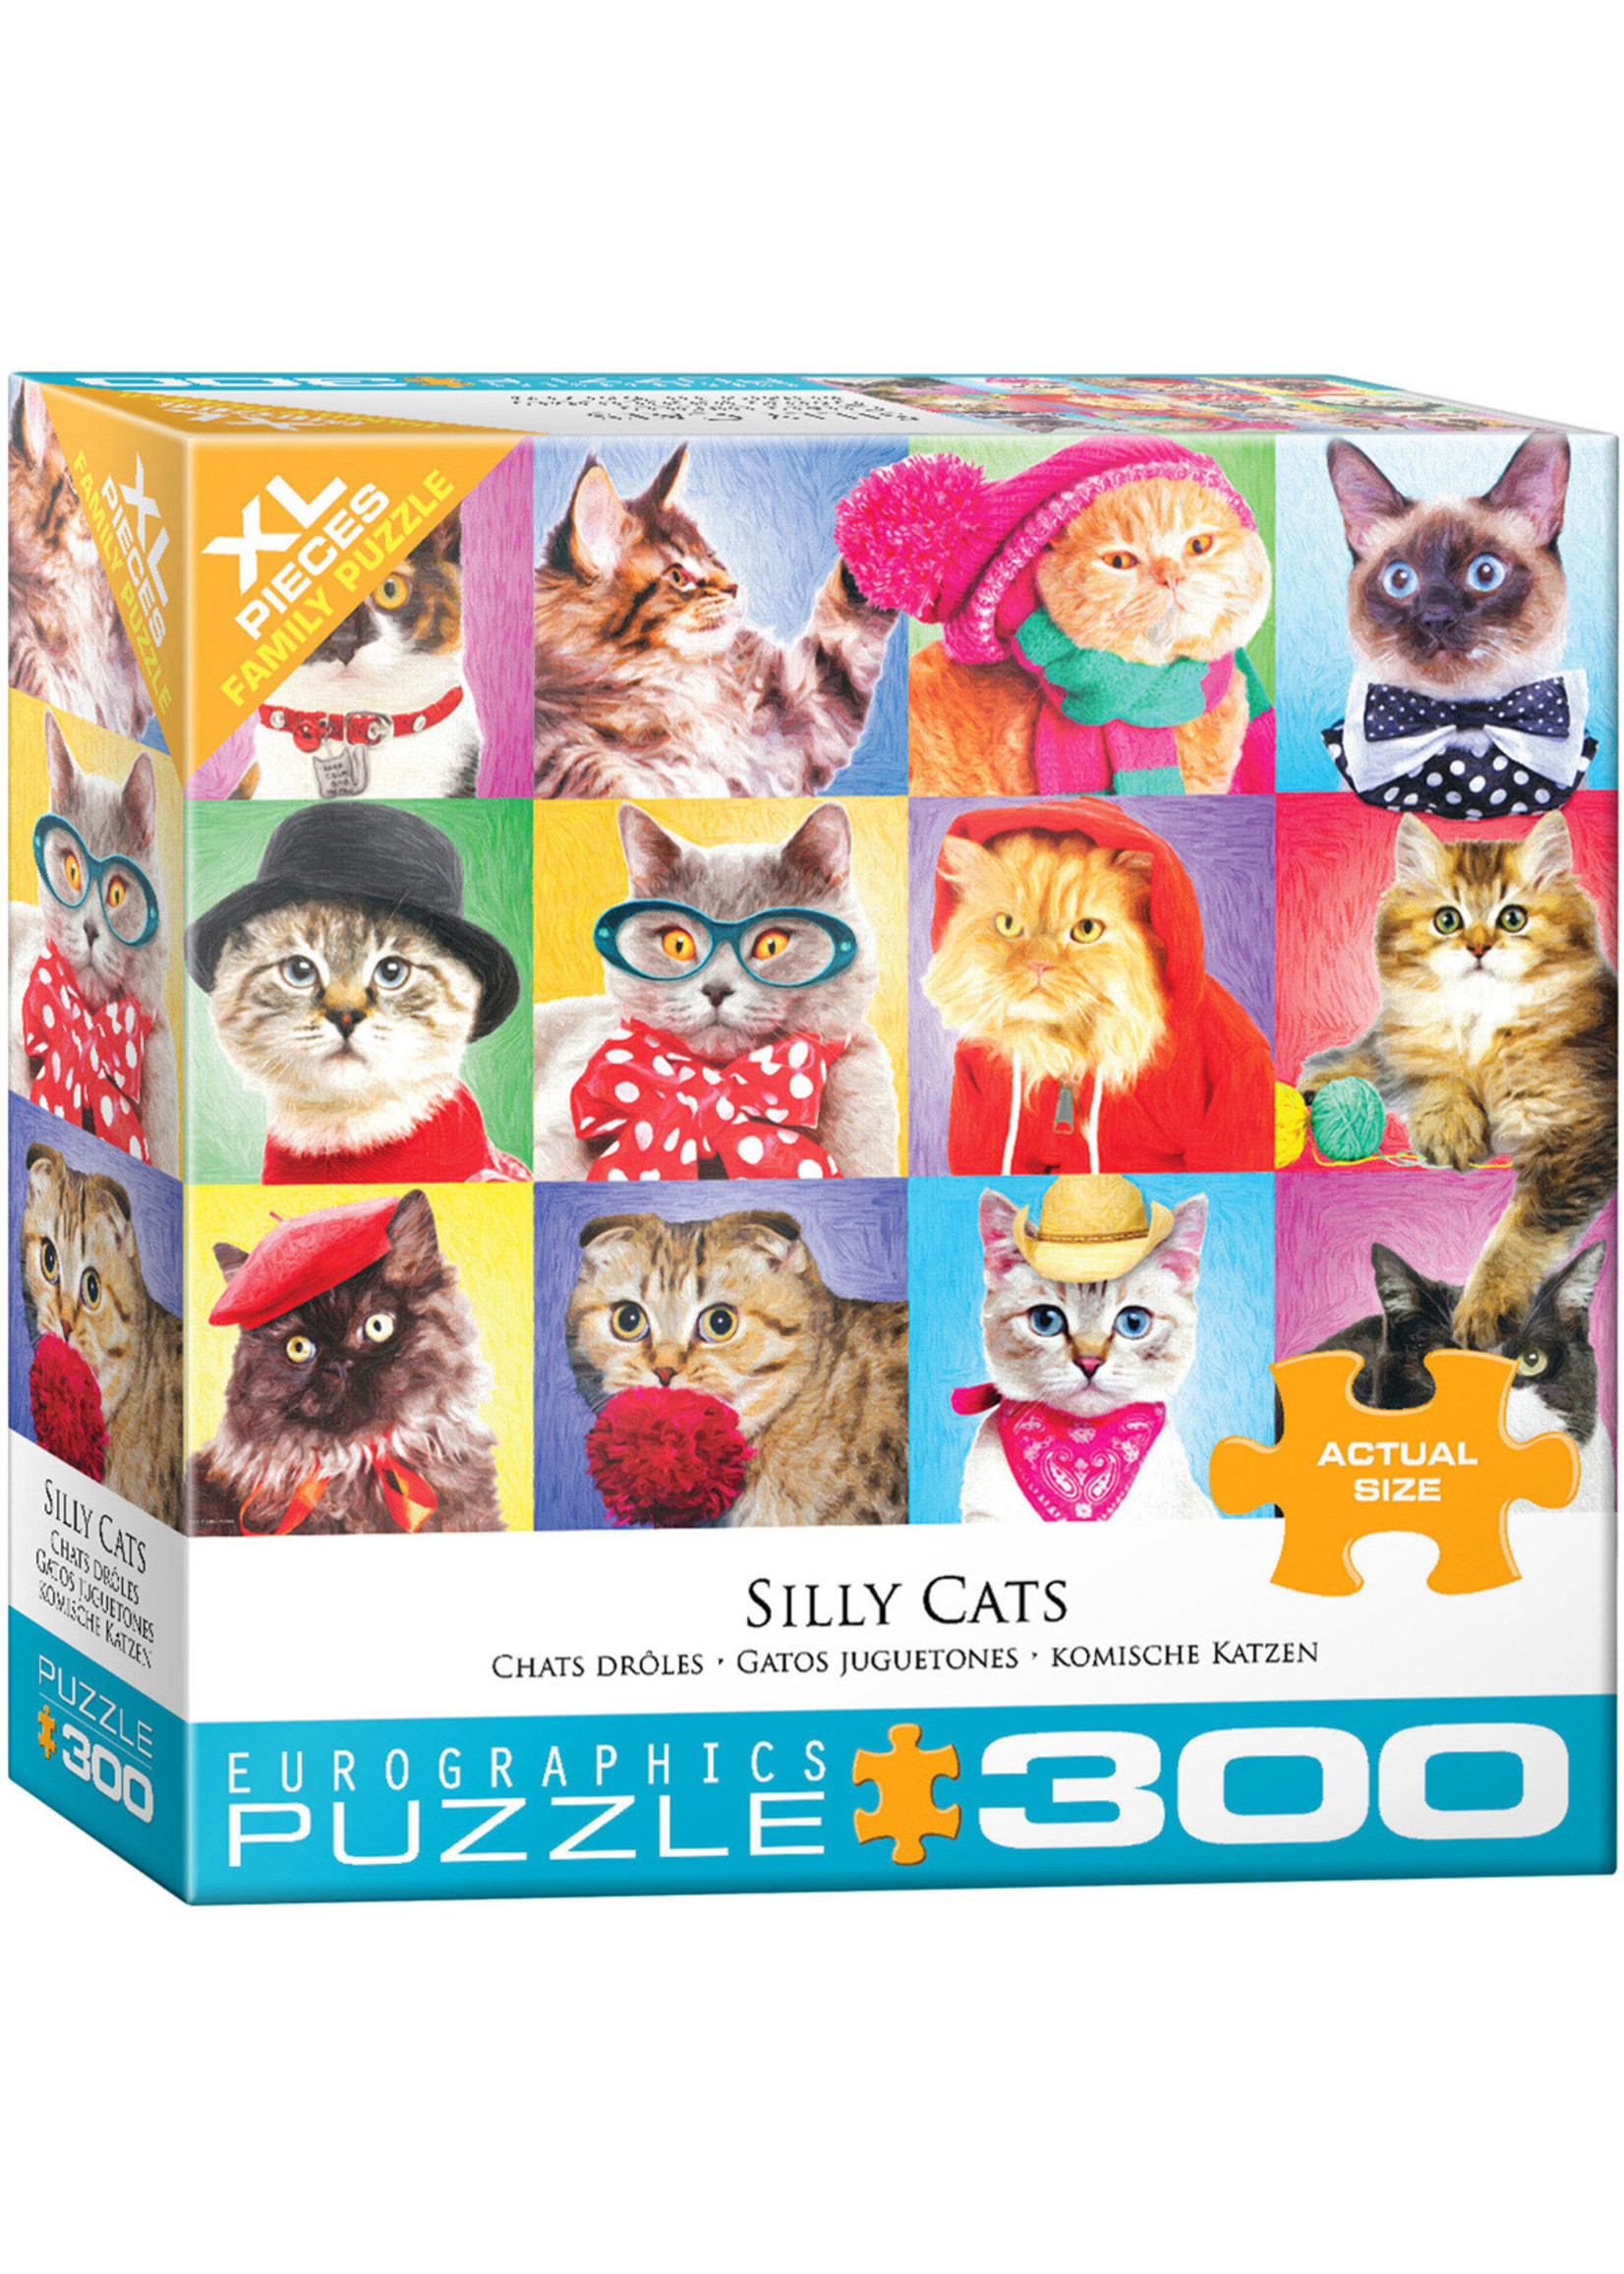 Eurographics "Silly Cats" 300 Piece Puzzle